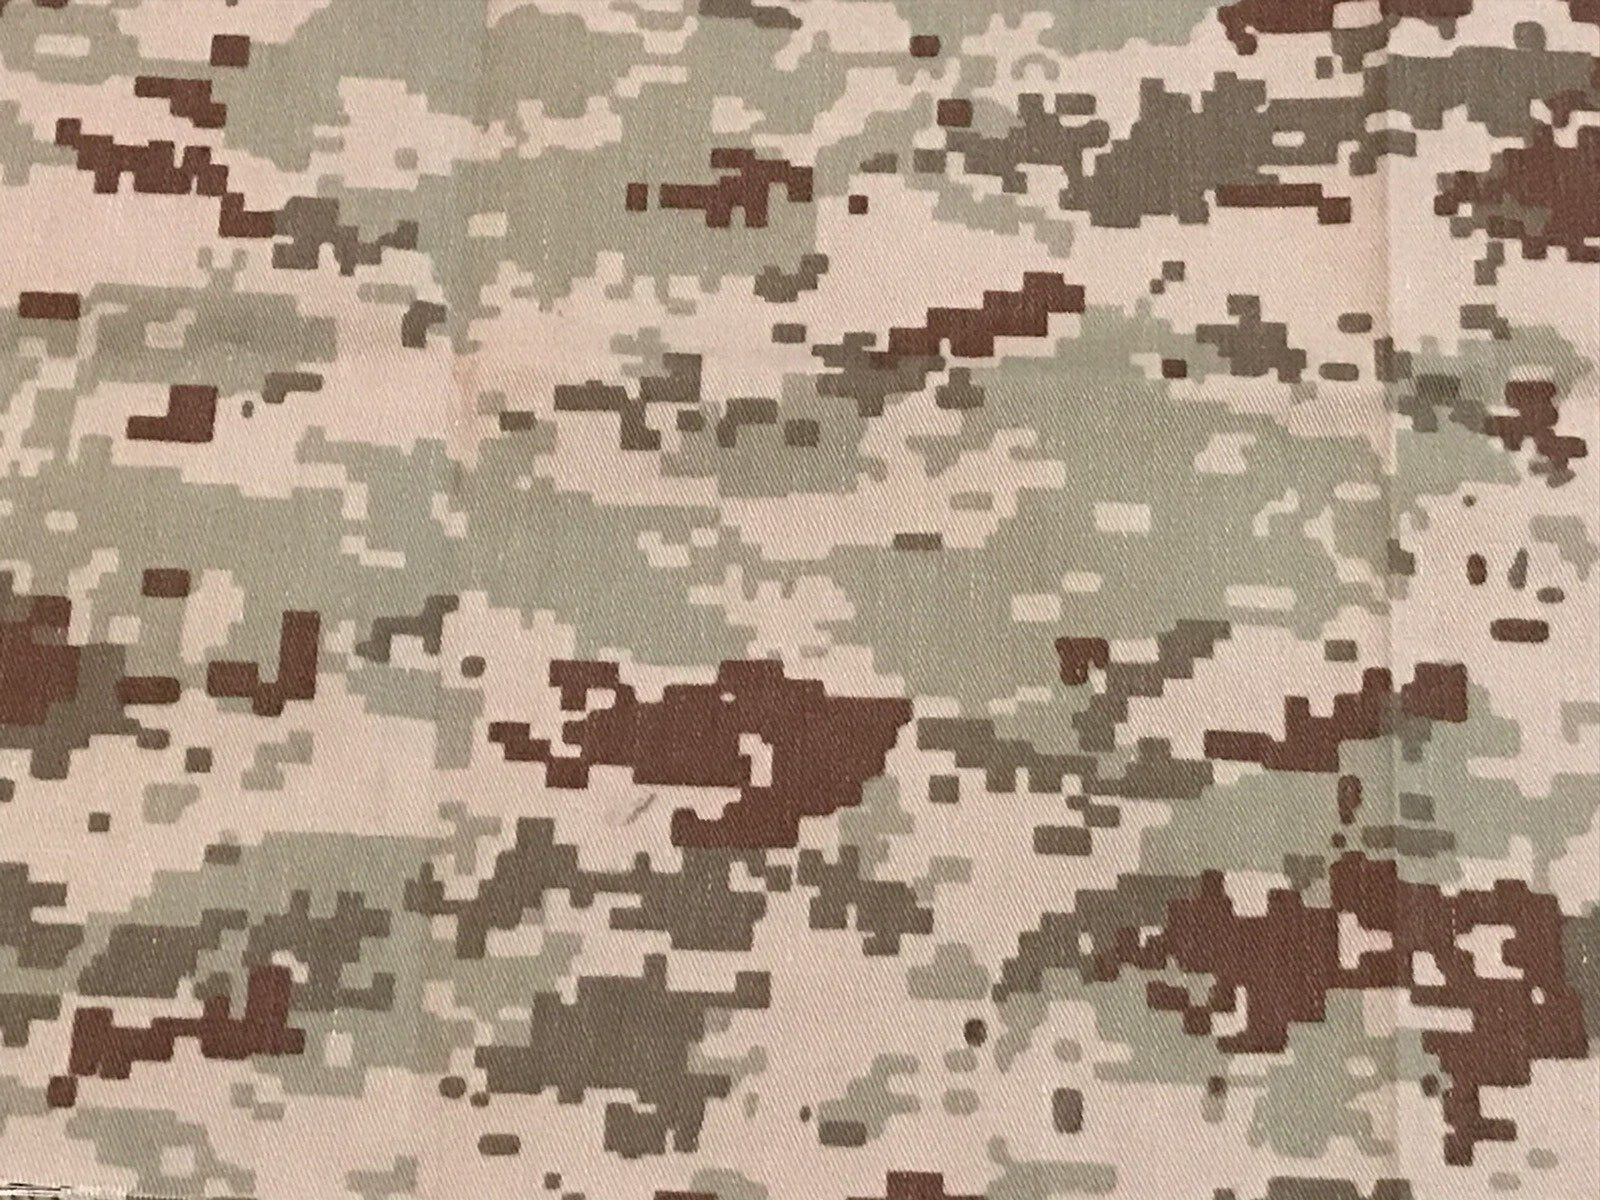 Unknown Foreign Desert Digital Camouflage Fabric - REMNANTS